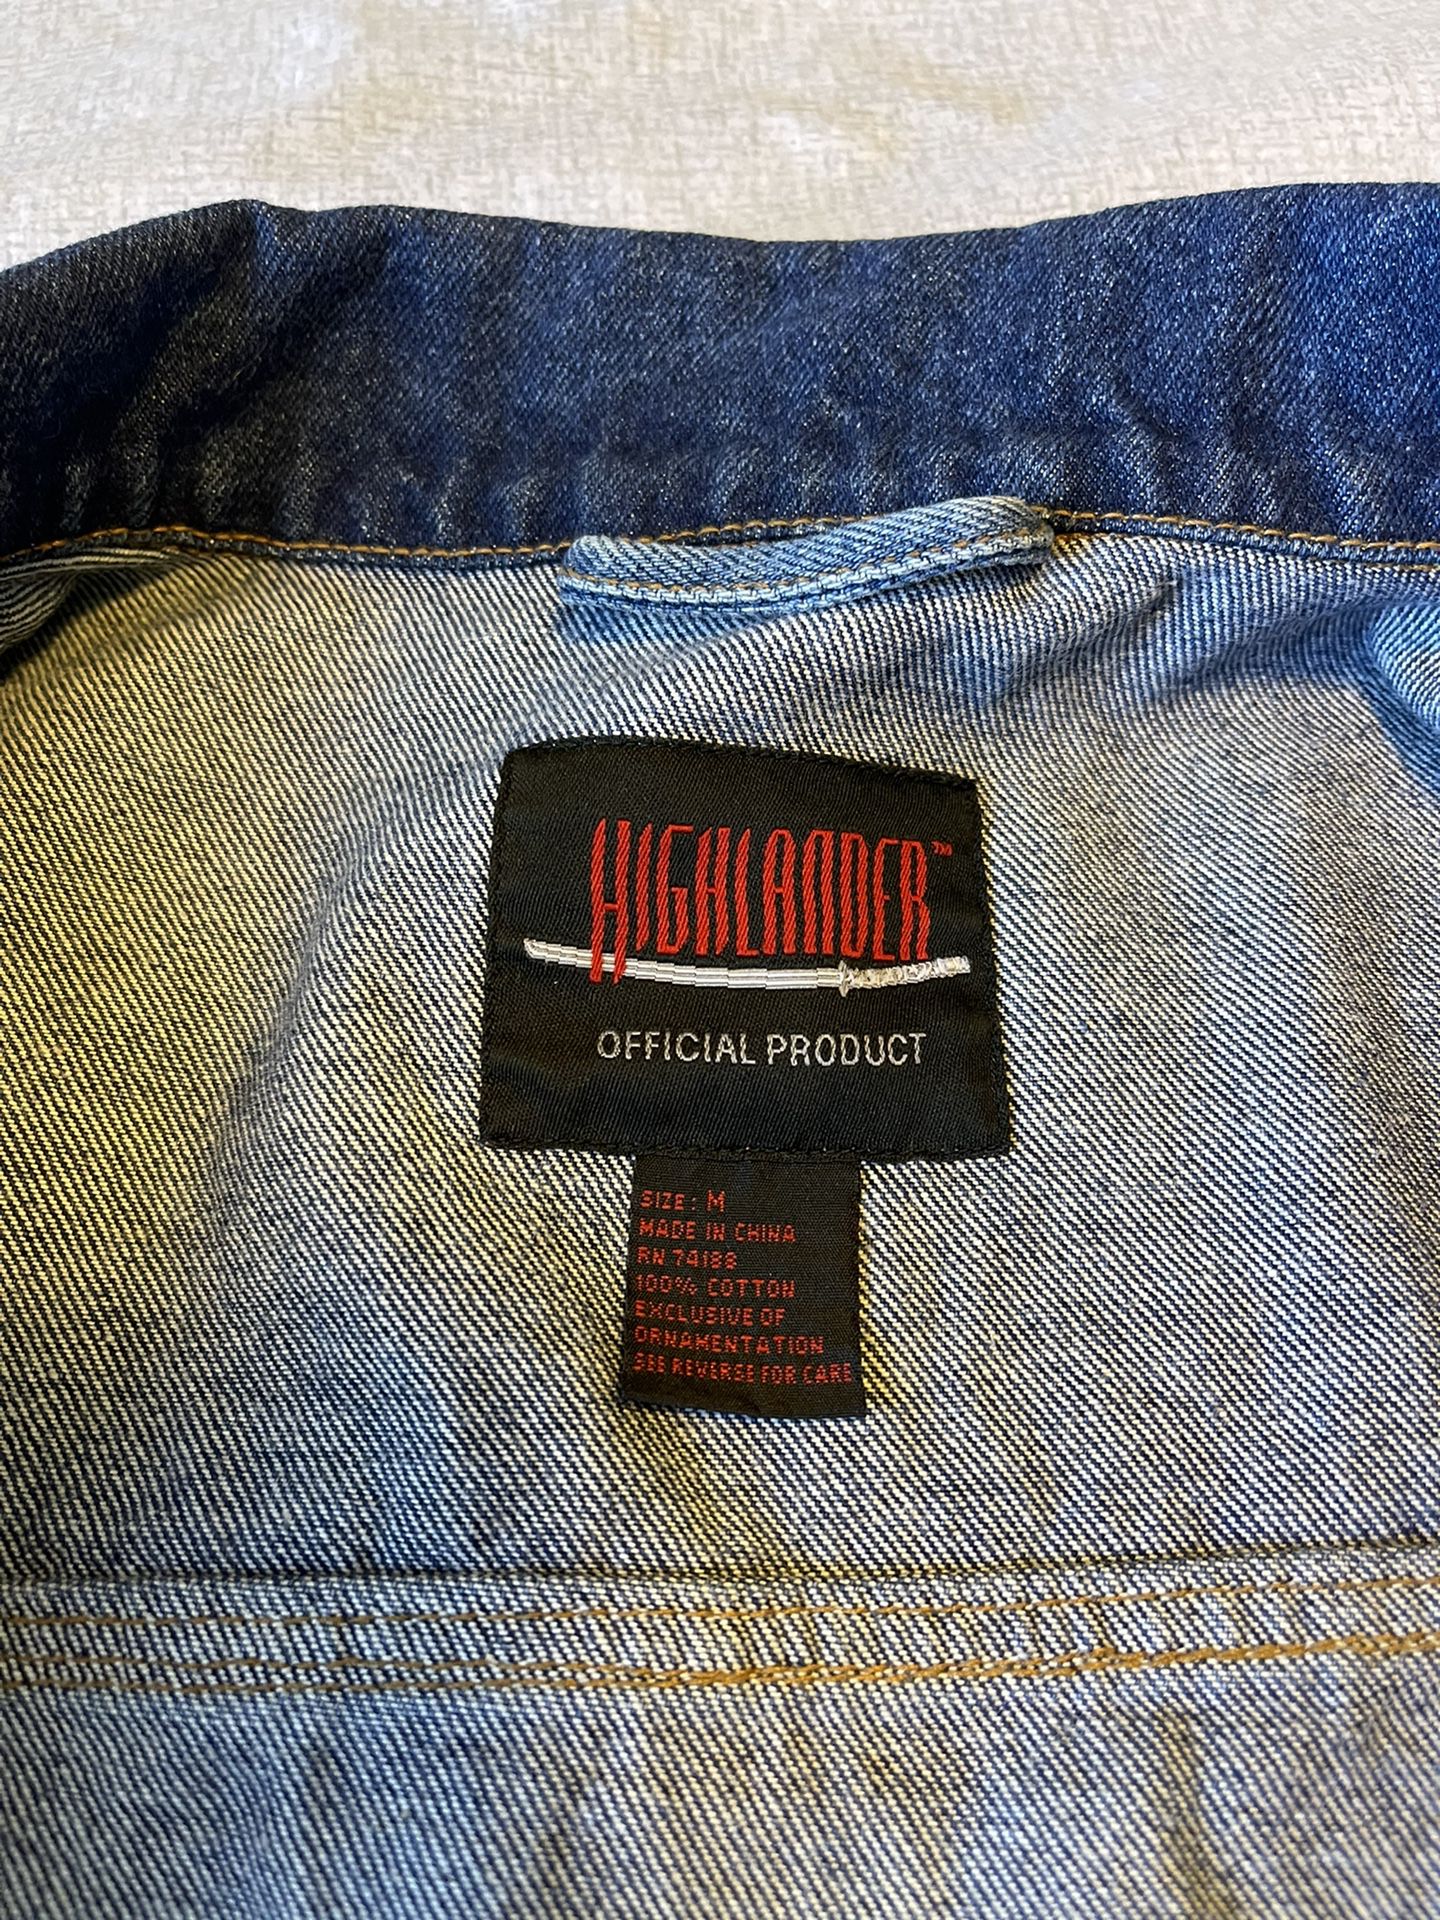 Highlander Size Medium Official Product Promo Denim Jacket Vintage There Can Be